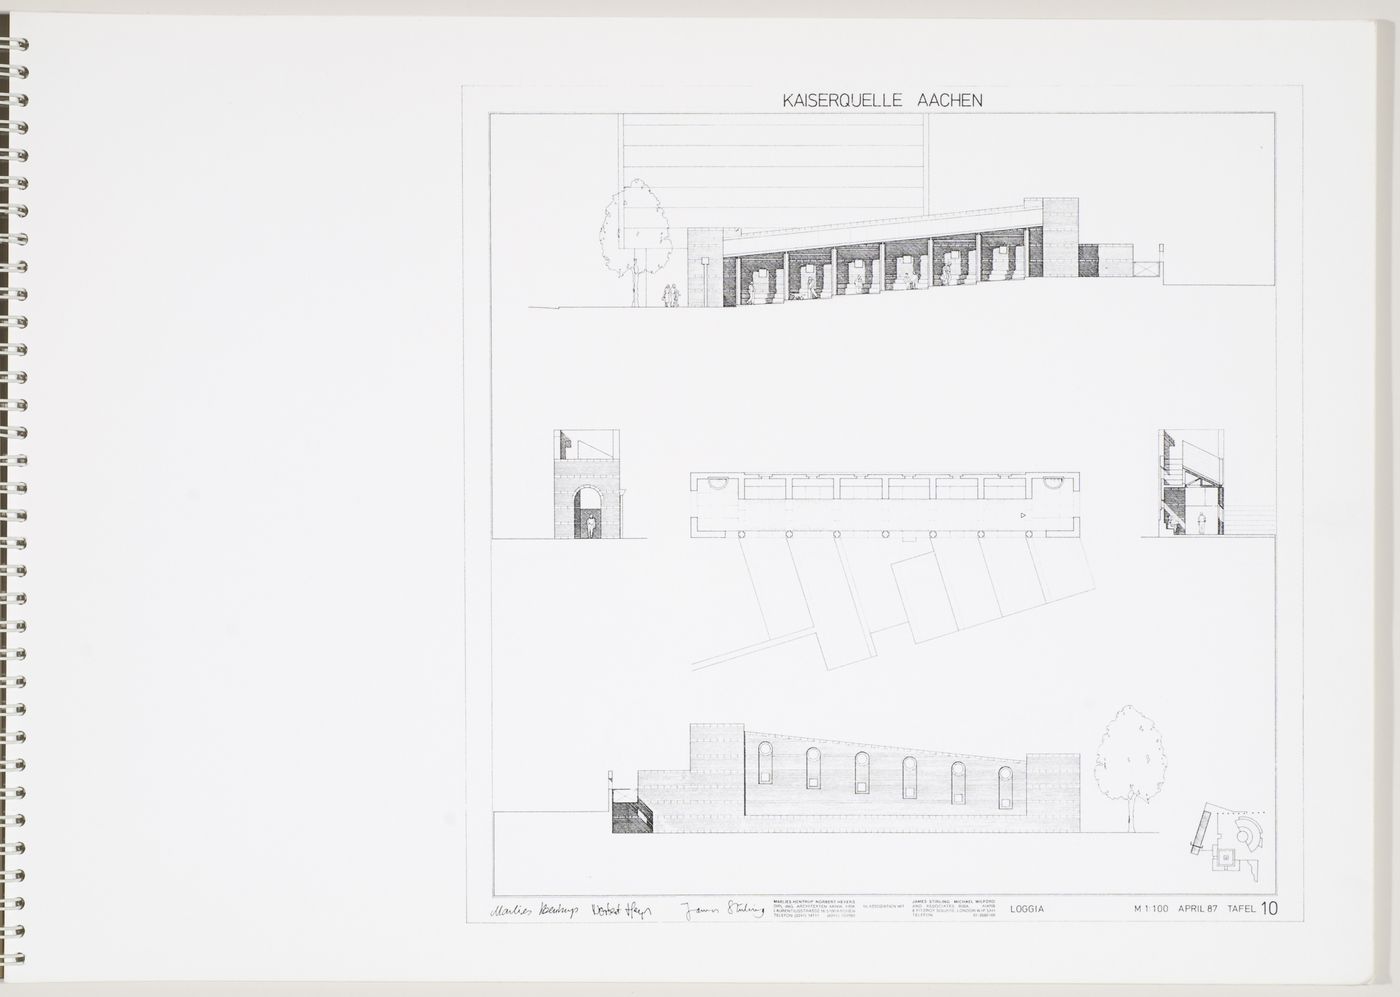 Kaiserplatz, Aachen, Germany: elevations, section and plans